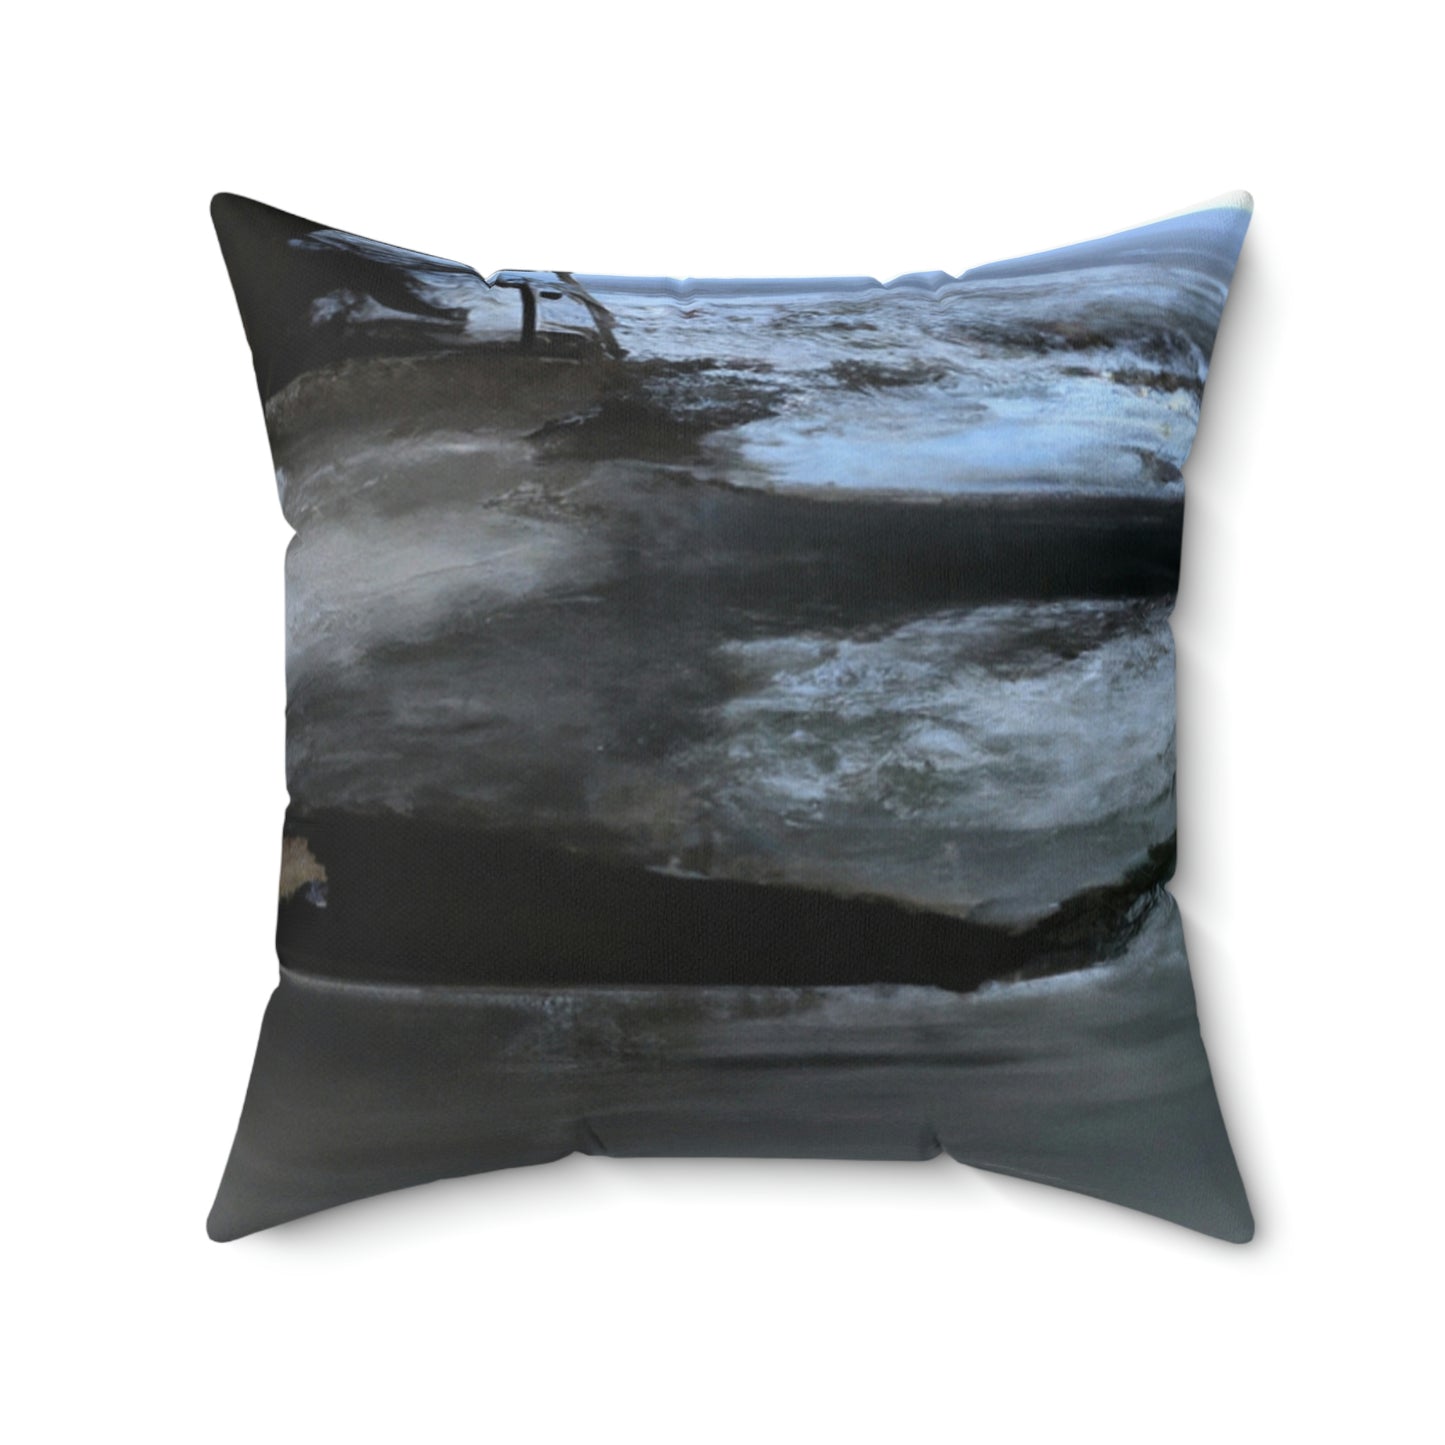 "The Frozen Depths of History" - The Alien Square Pillow